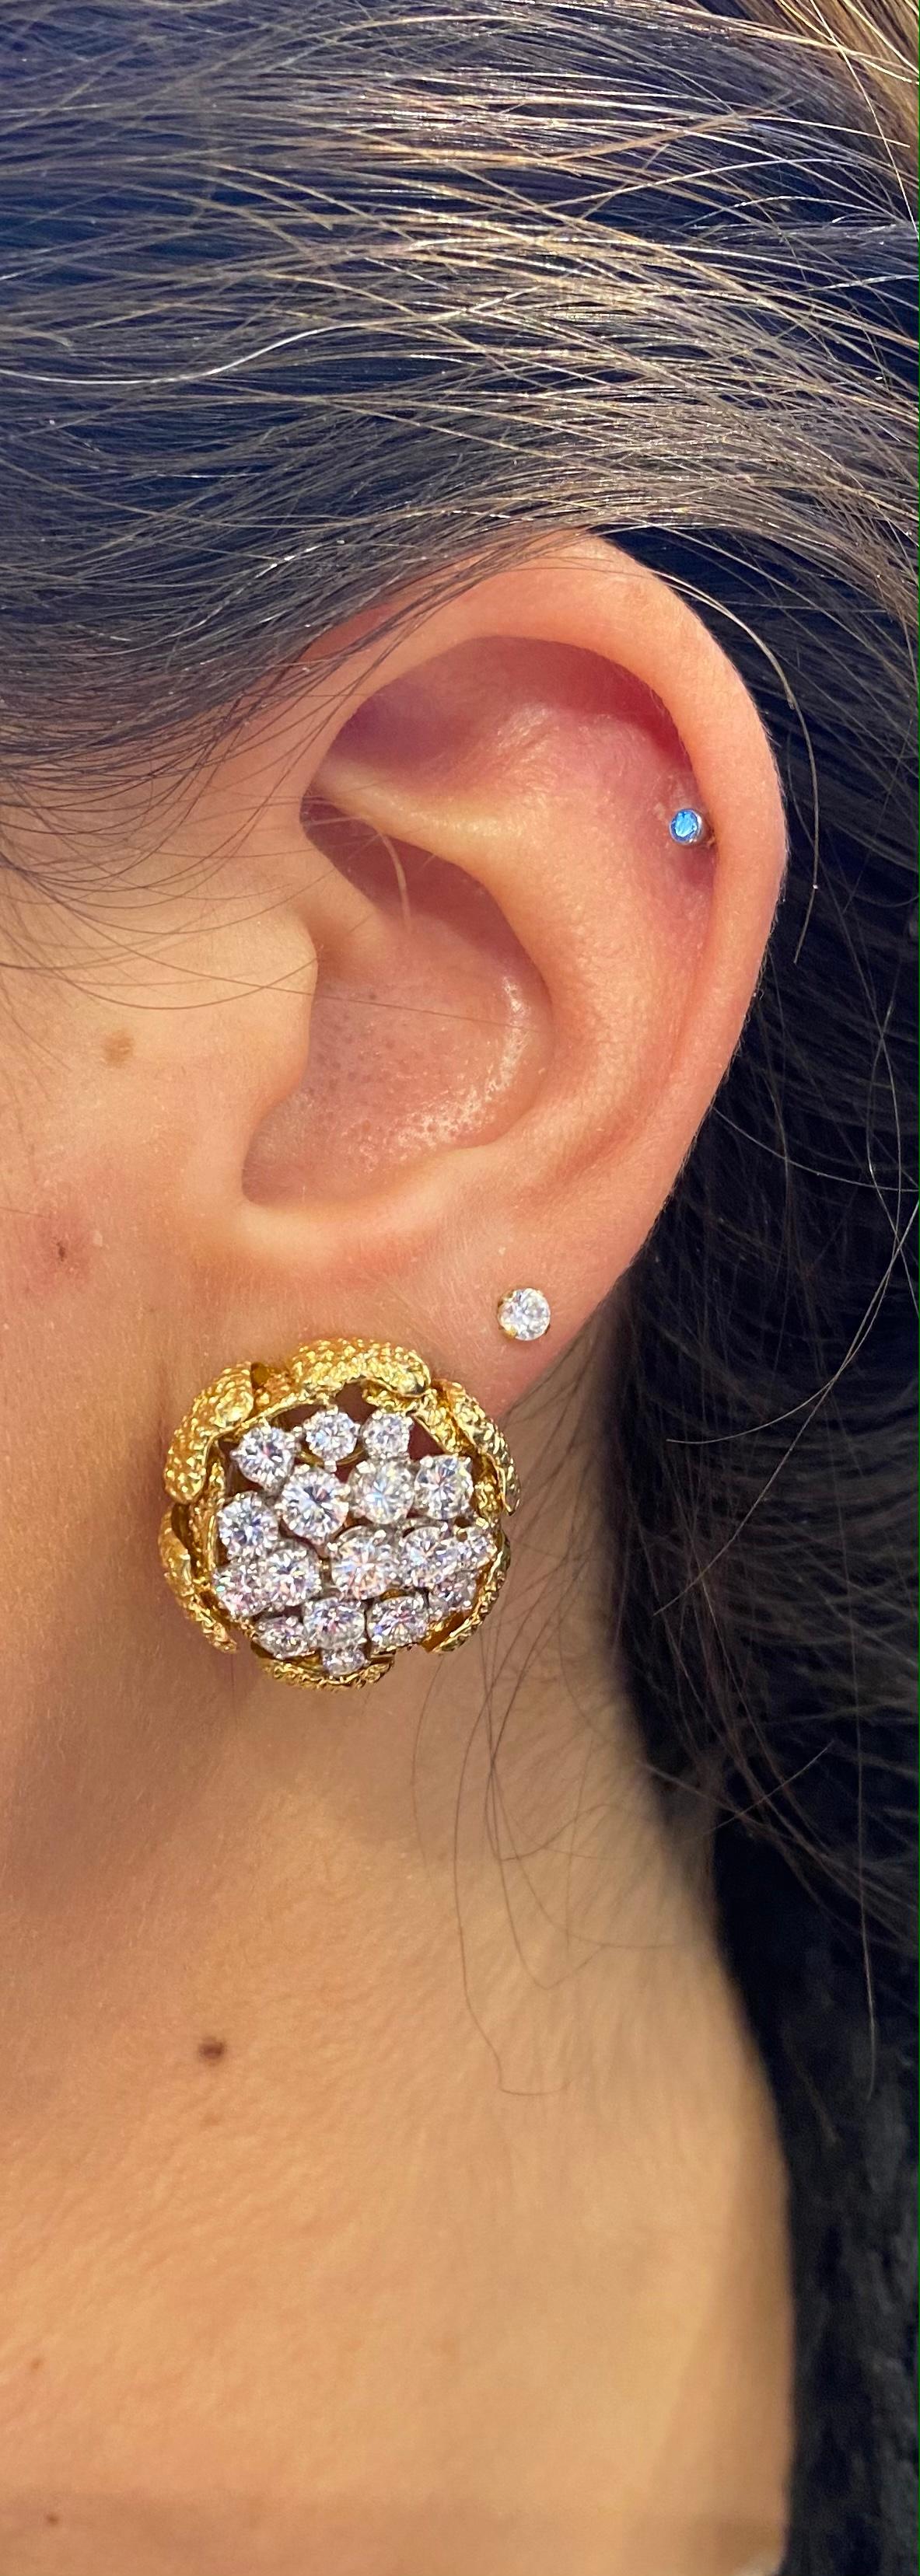 Van Cleef & Arpels Vintage Gold & Diamond Earrings
34 round cut diamonds approximately 4.50-5.00 carats , G-H color, VS clarity.
Back Type: Clip On 
Signed Van Cleef & Arpels, and numbered.
Measurements: .75